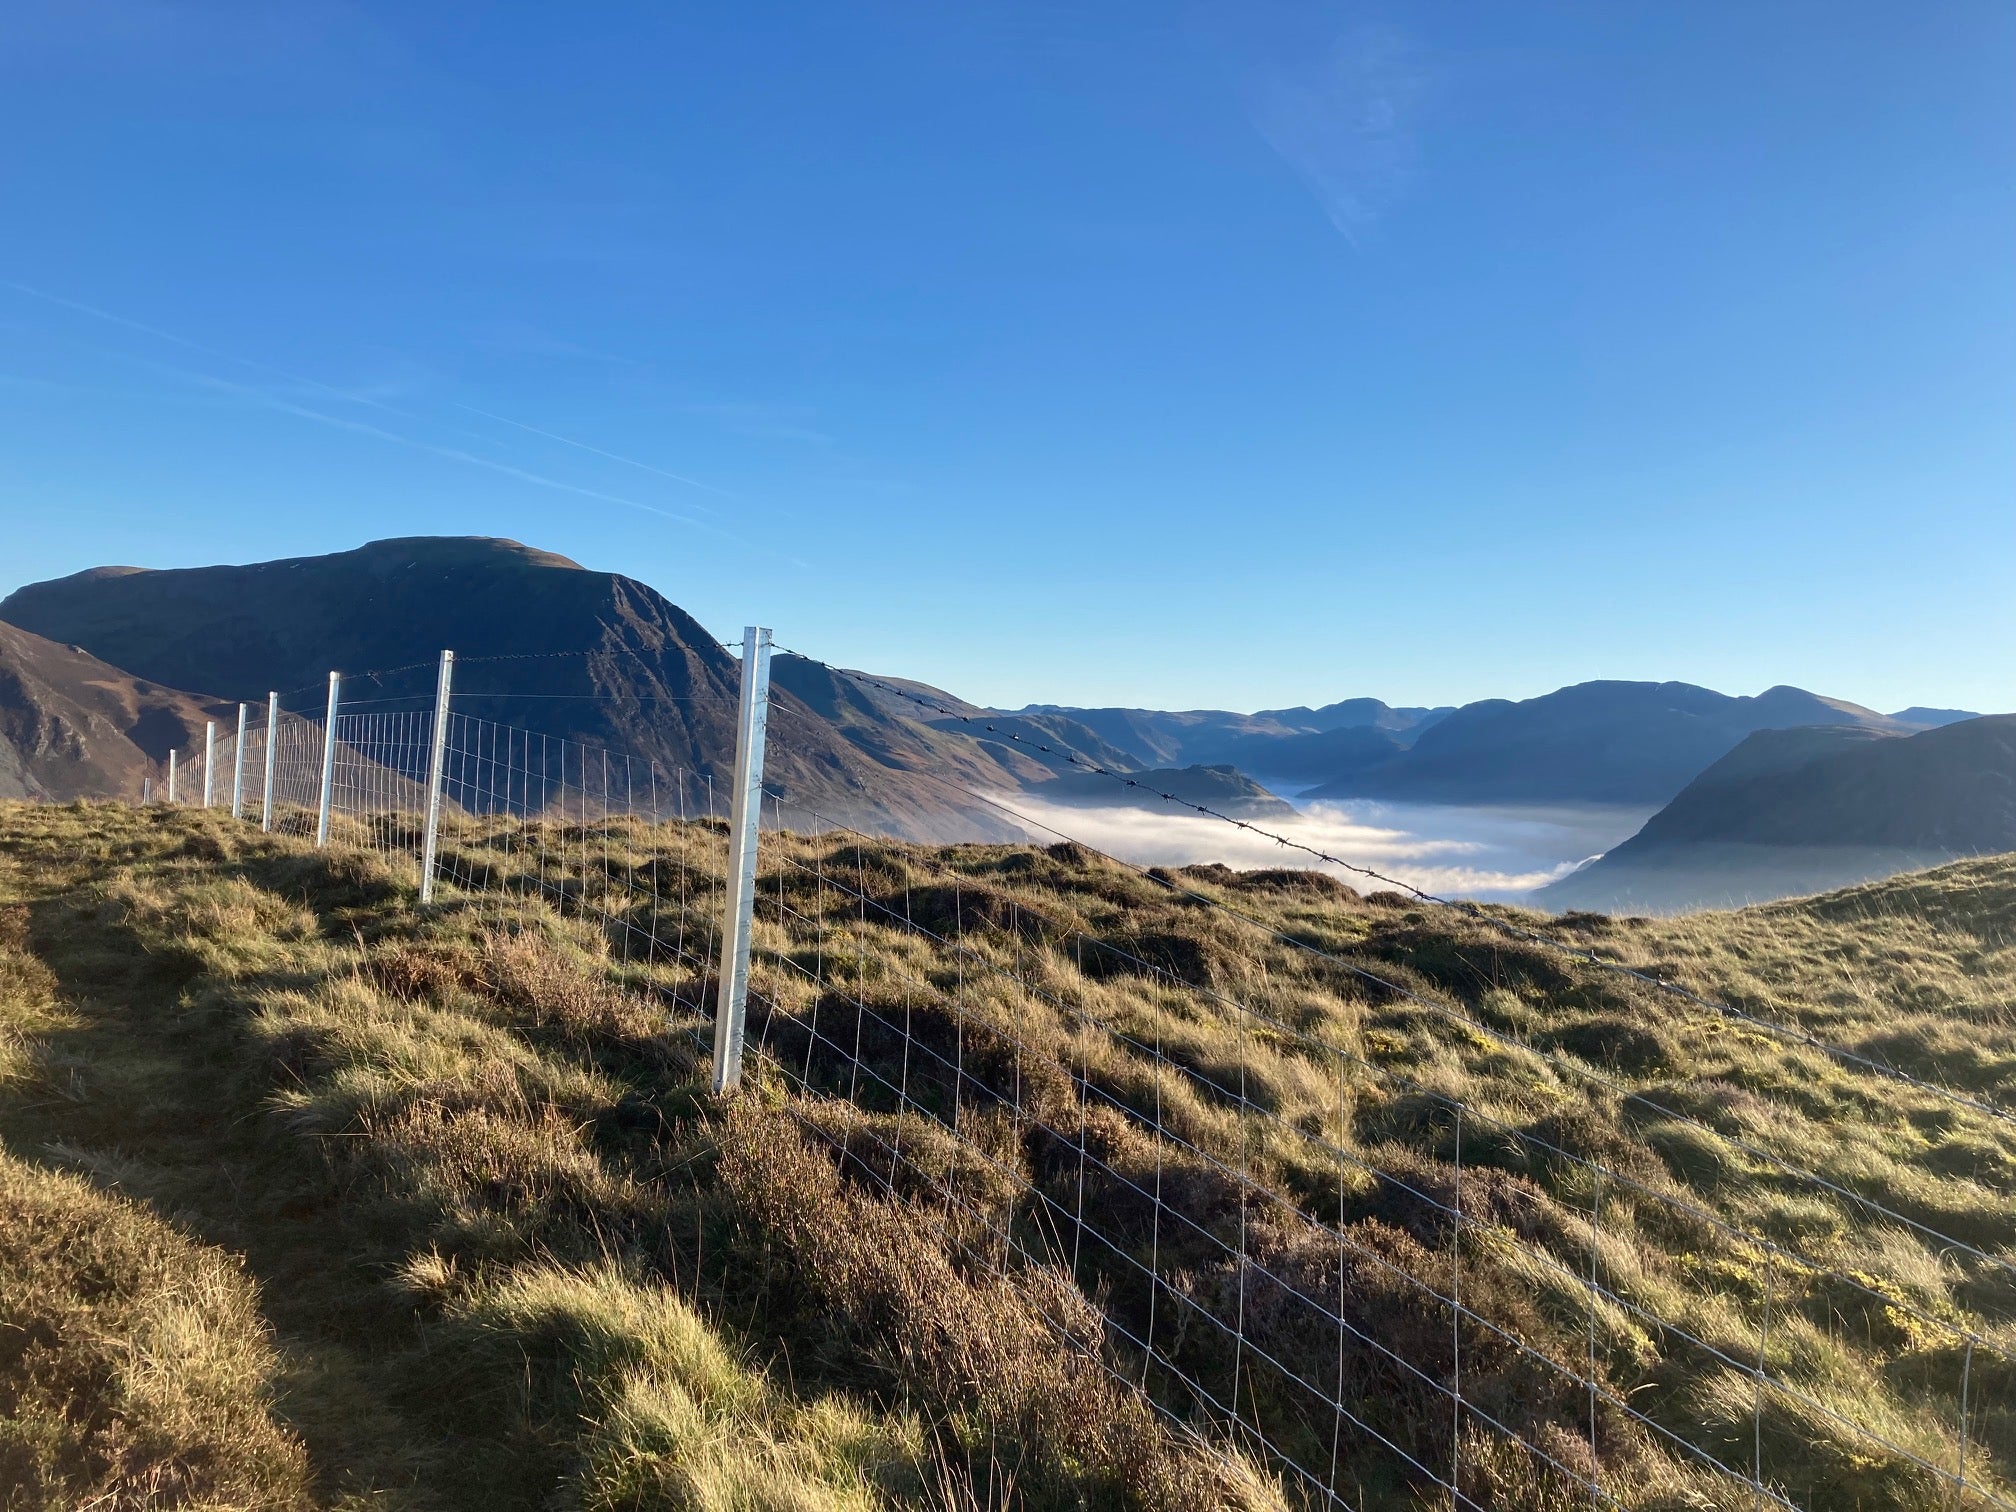 The view from Low Fell with the new fence